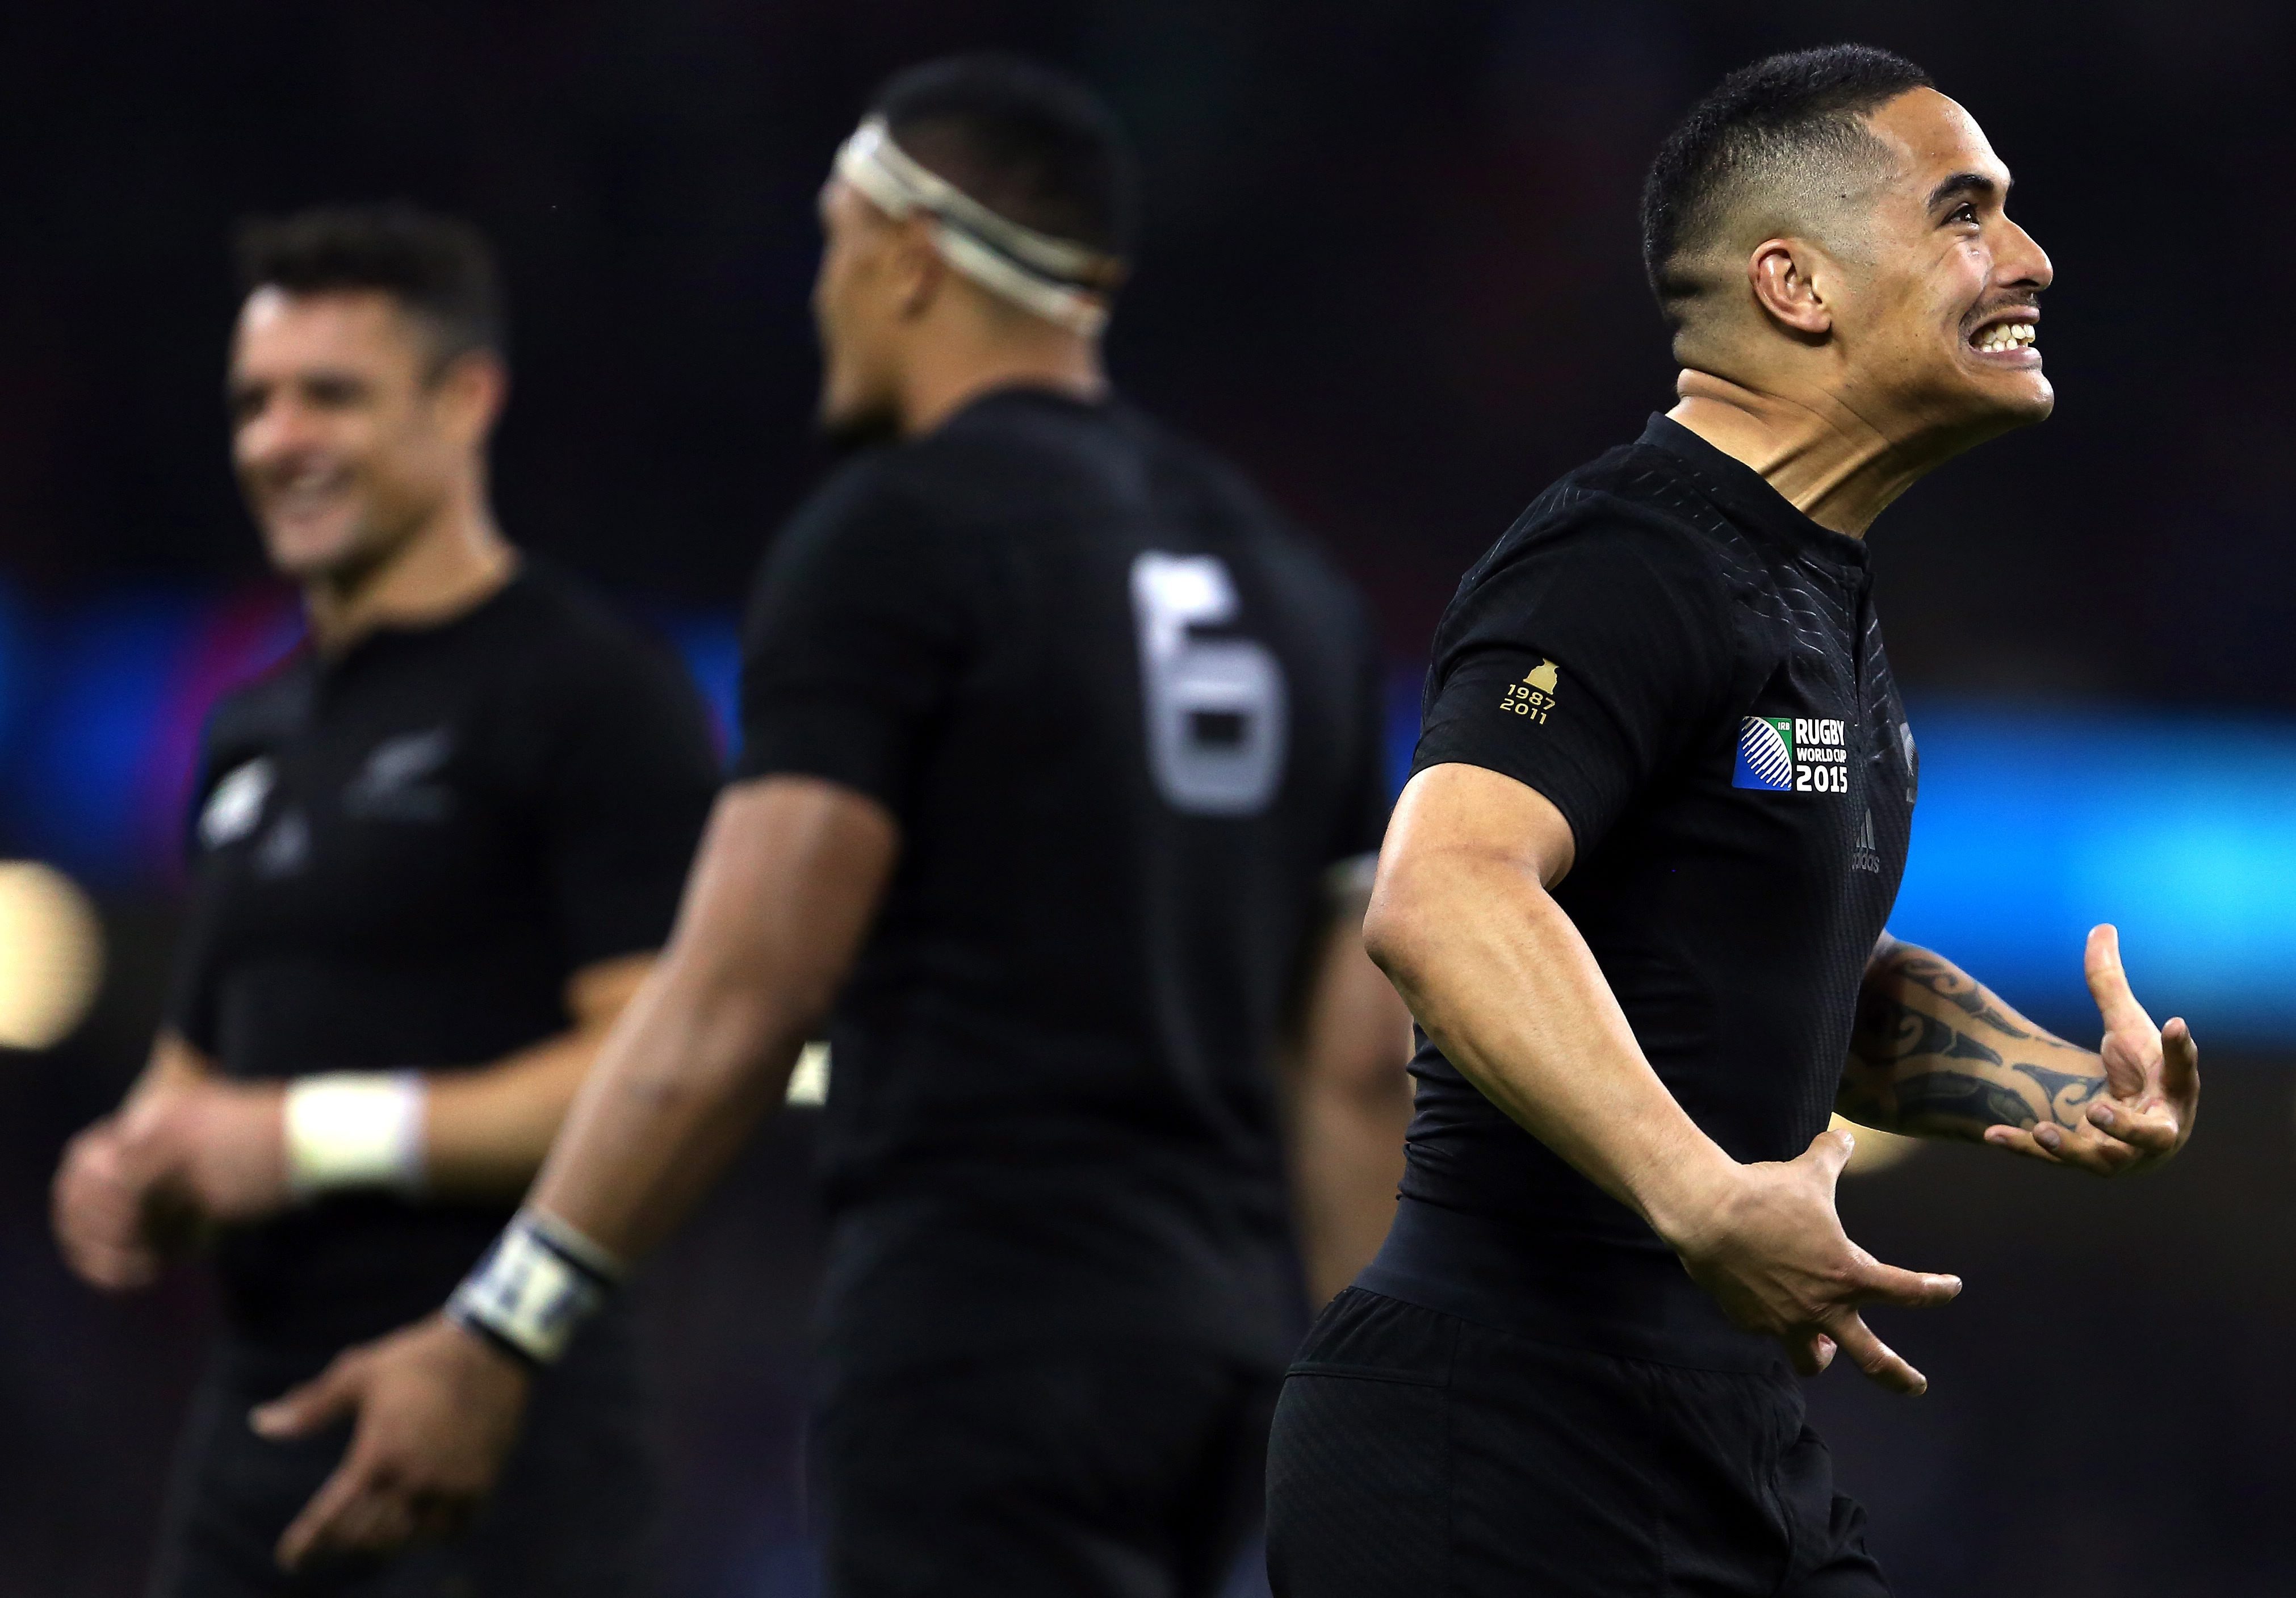 Aaron Smith New Zealand All Blacks celebrates defeating France Rugby World Cup 2015 quarter-finals